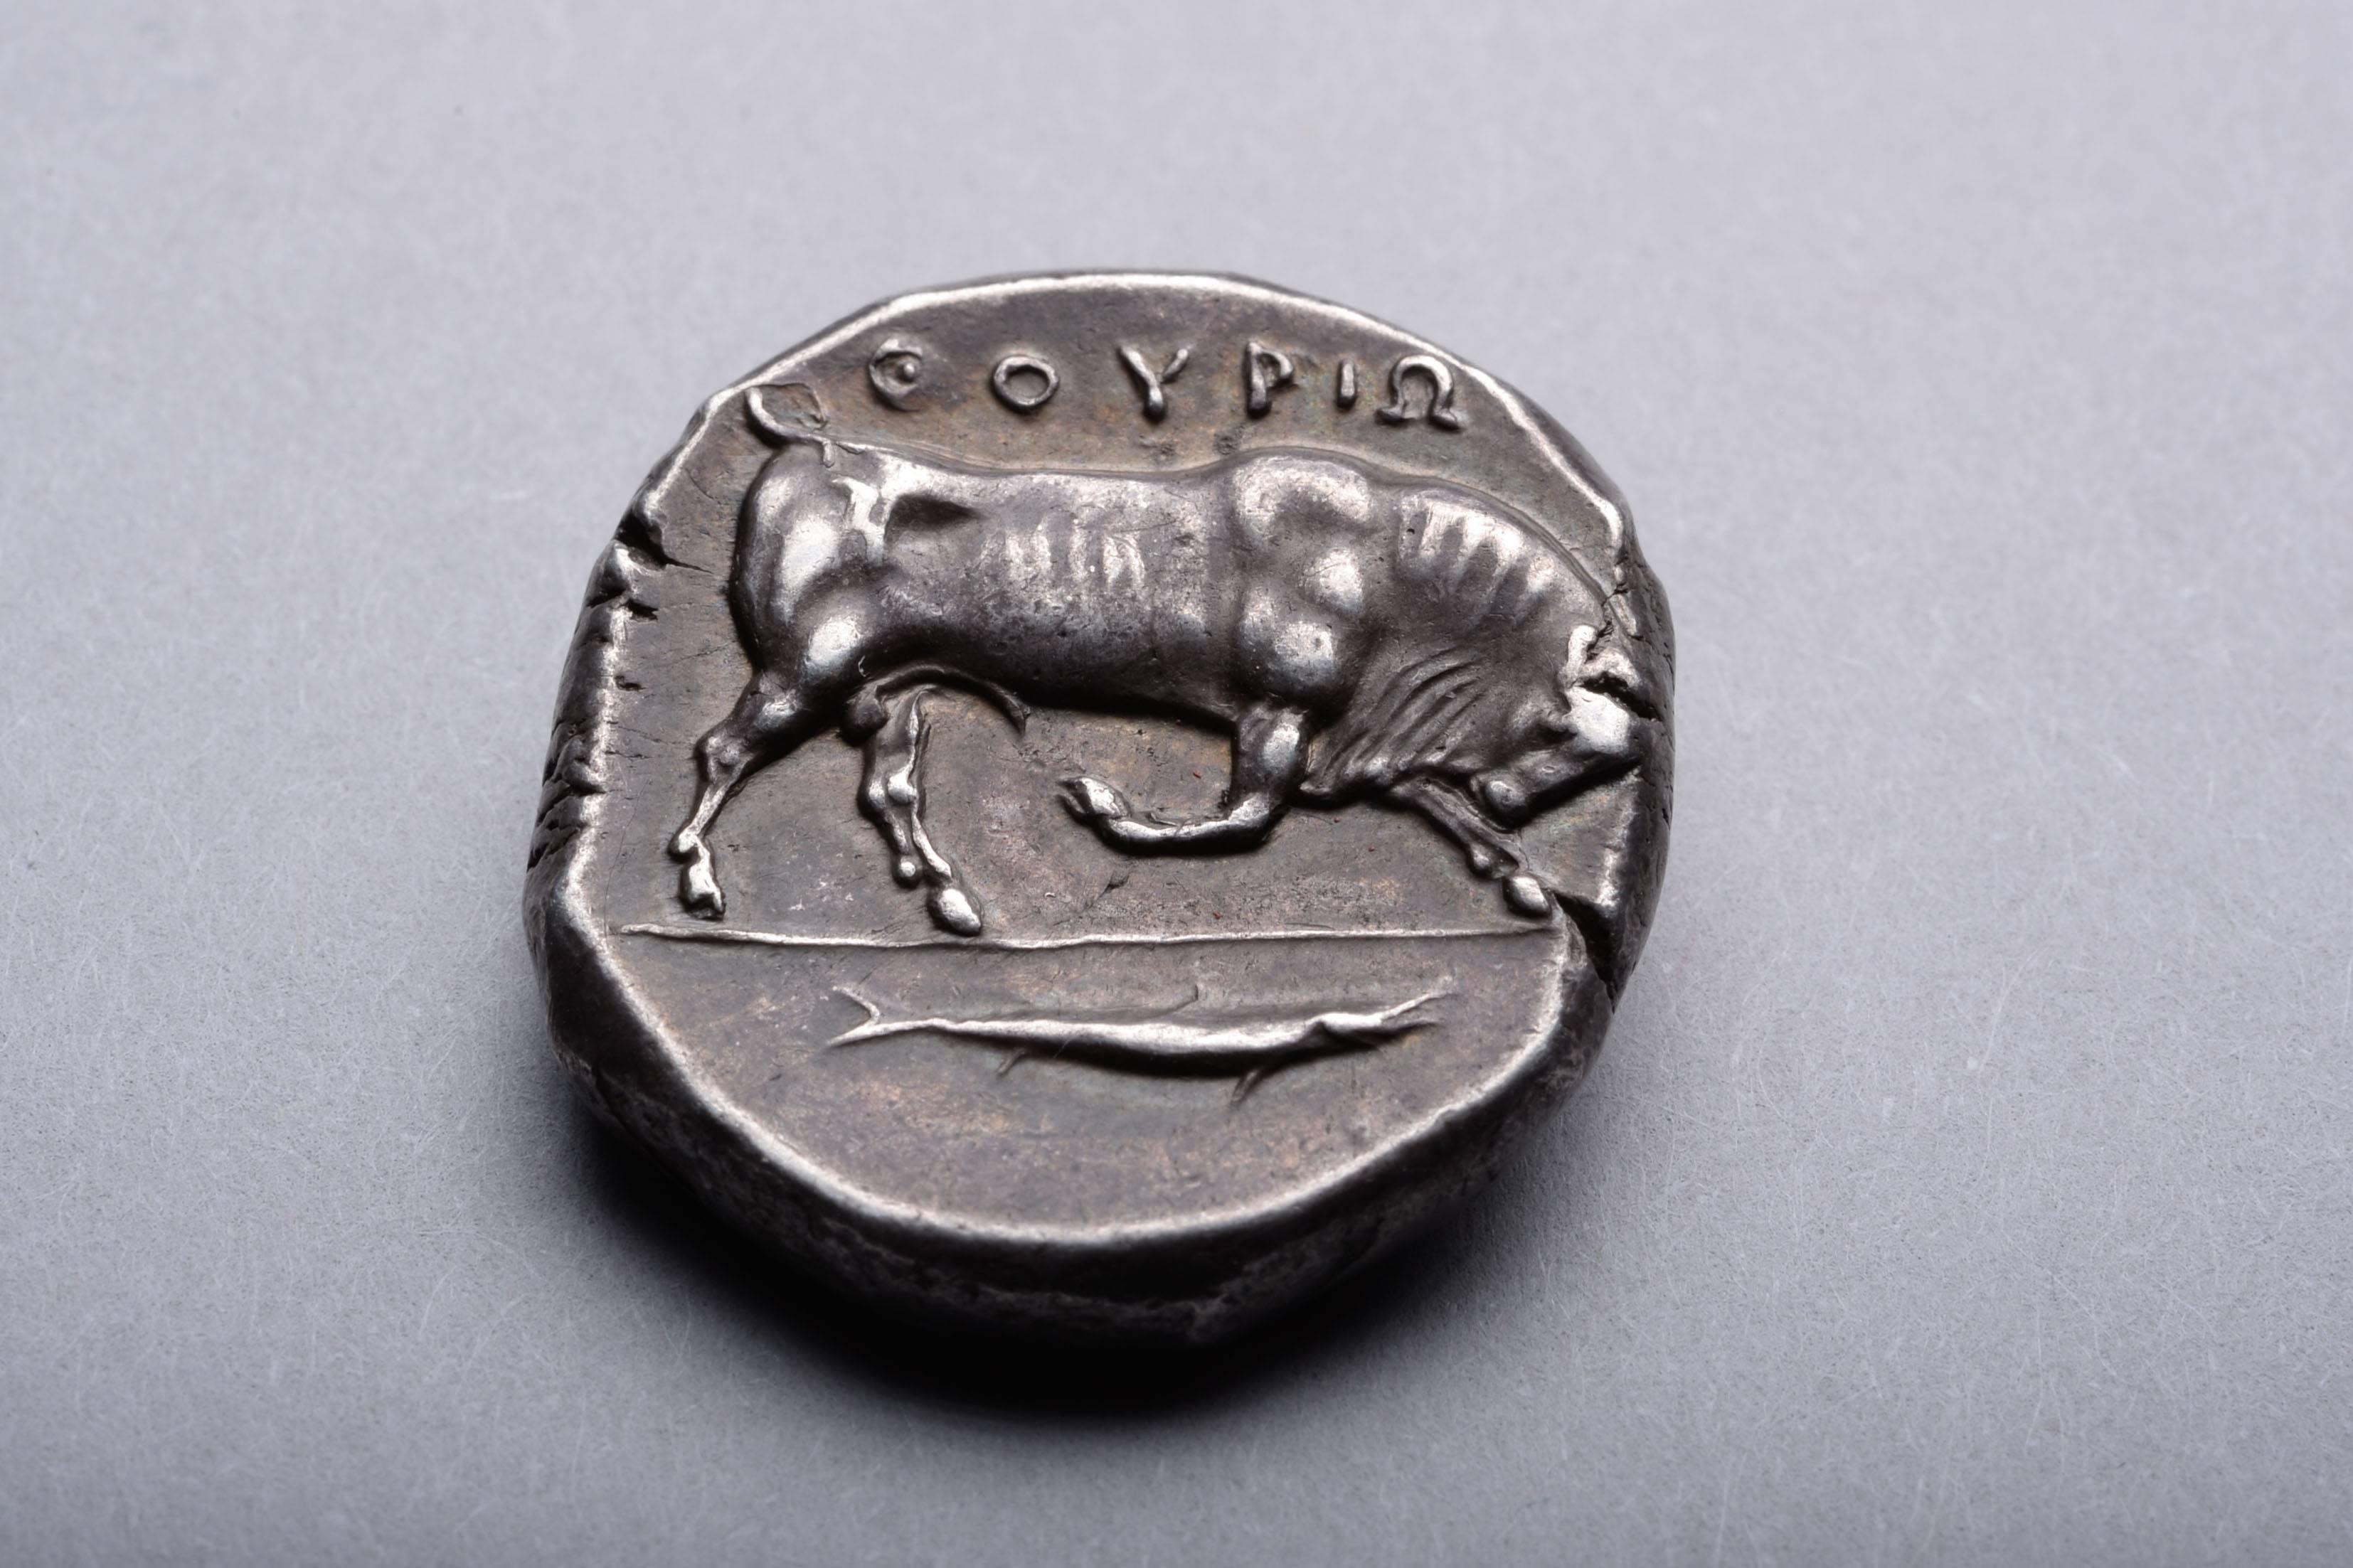 A silver distater from the collection of the British Museum, published in Sydney Noe's 1935 study. Minted in the Athenian colony of Thurium (Thourioi), South Italy, circa 400 - 350 BC.

The obverse with the head of Athena, wearing a crested